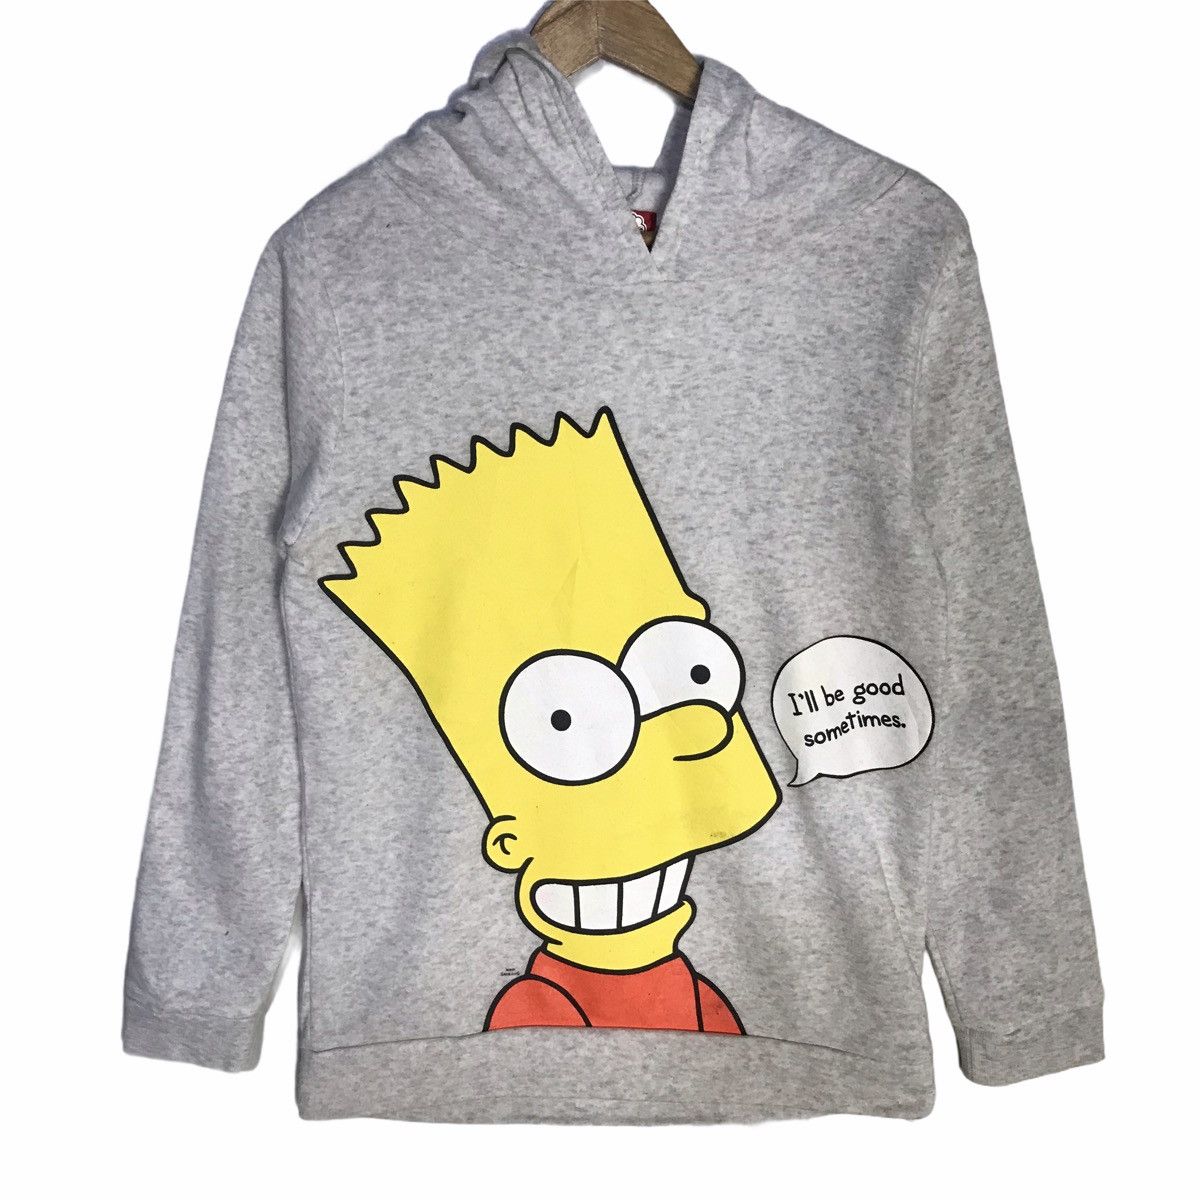 The Simpsons The simpsons hoodie Size US M / EU 48-50 / 2 - 1 Preview